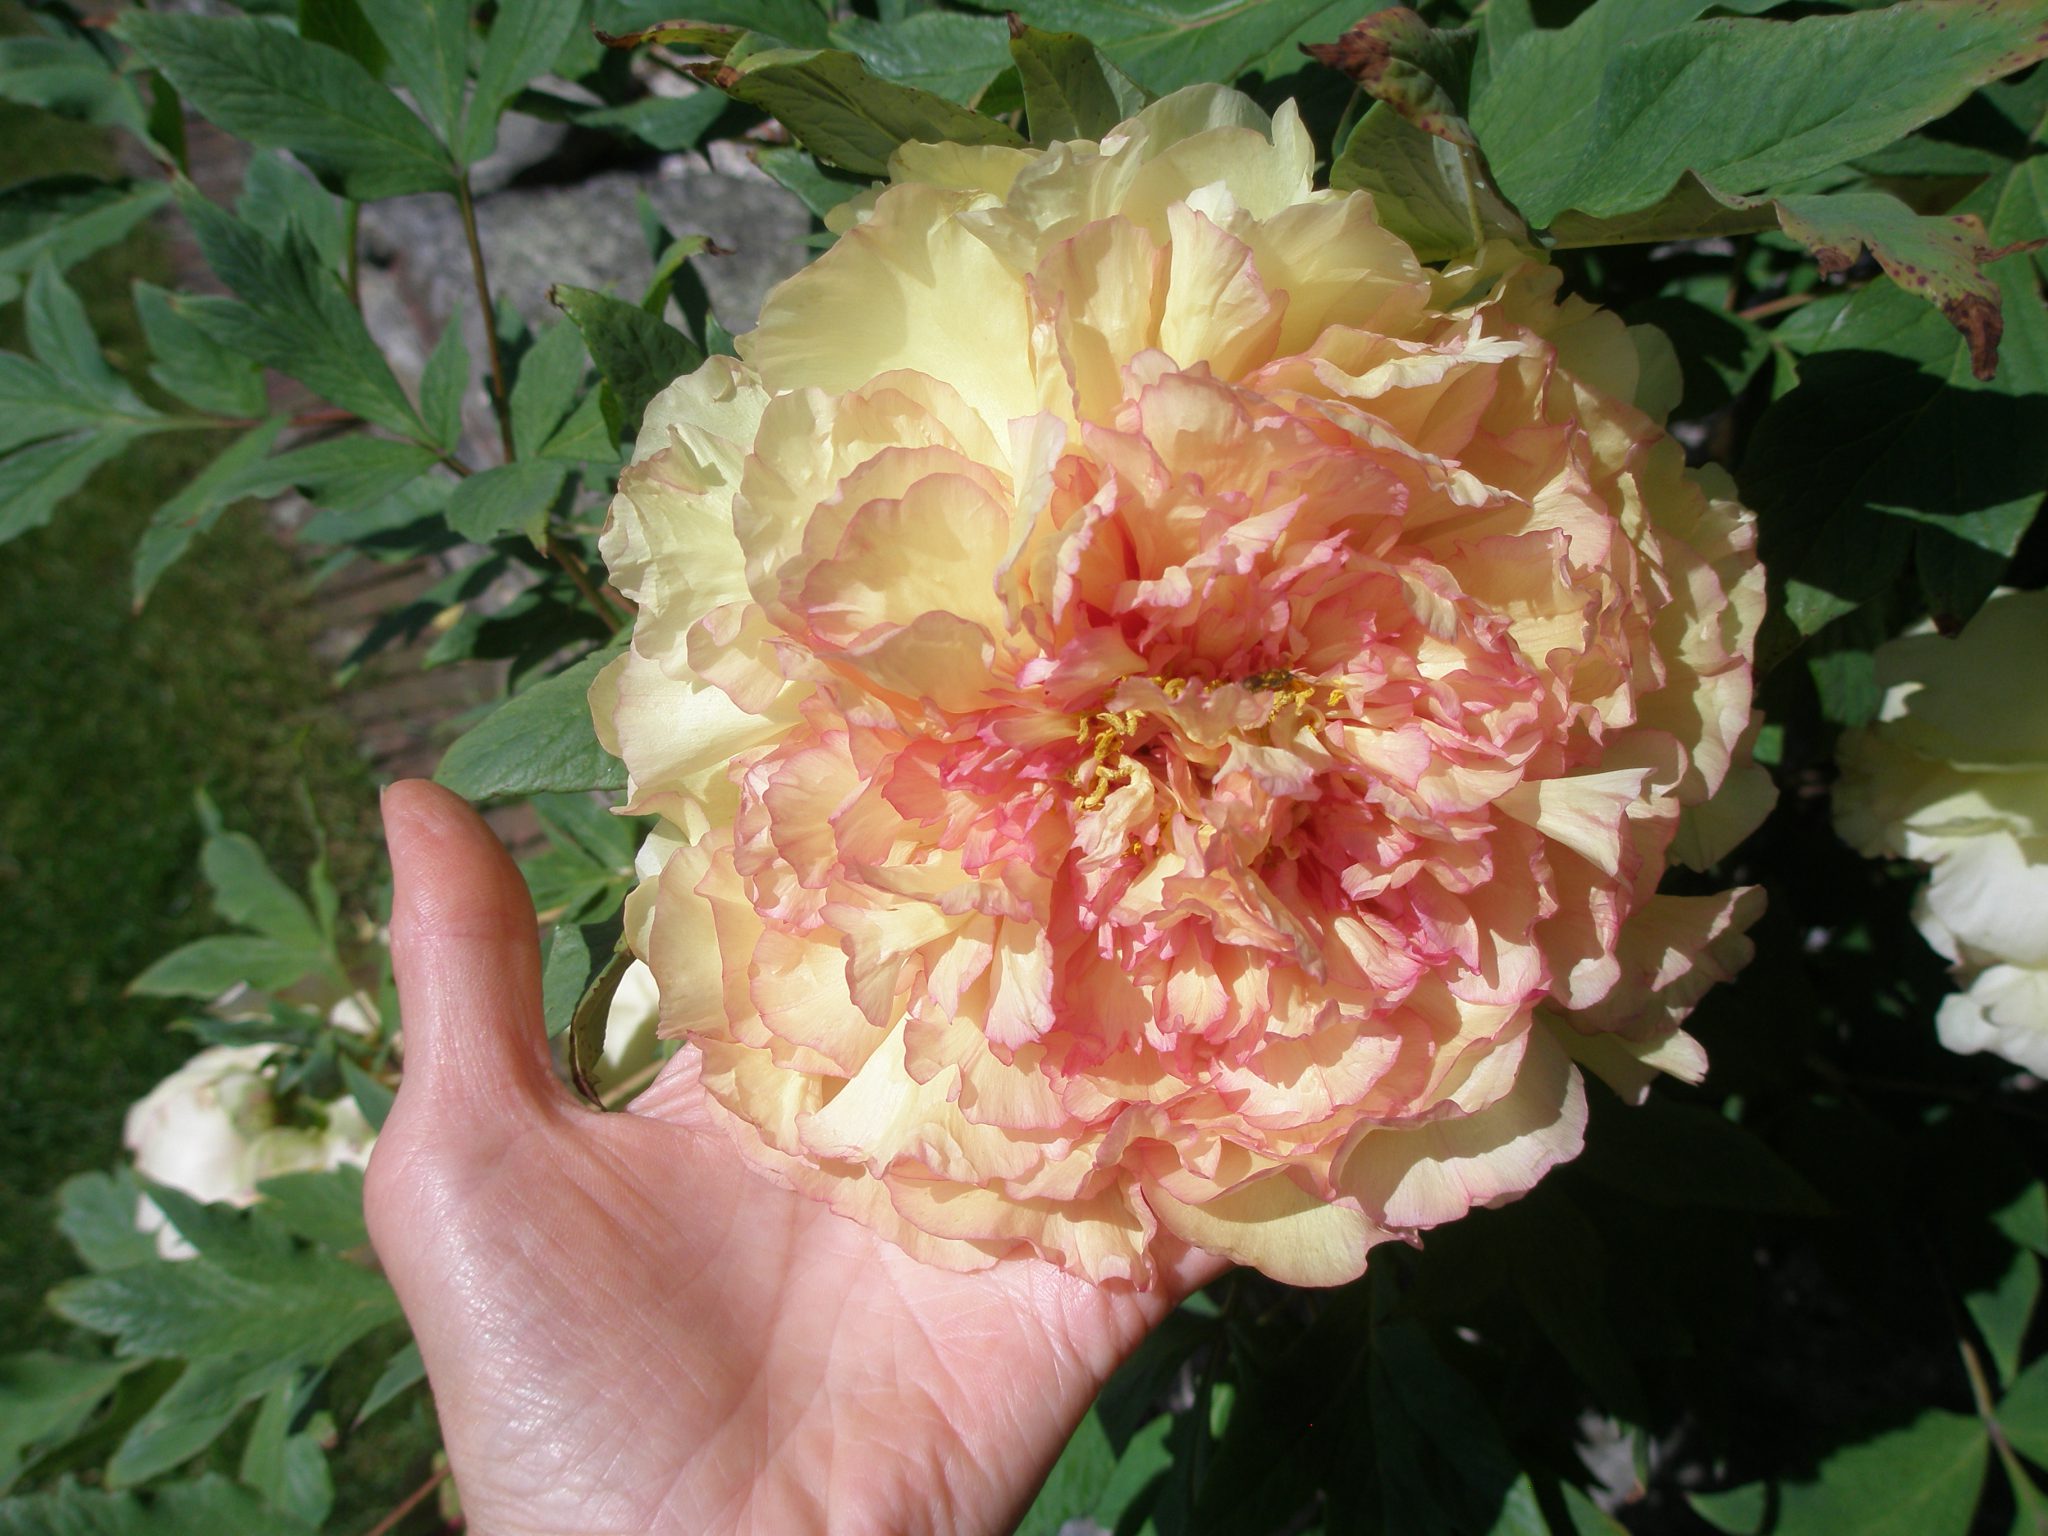 One giant Peony blossom, for me to fondle